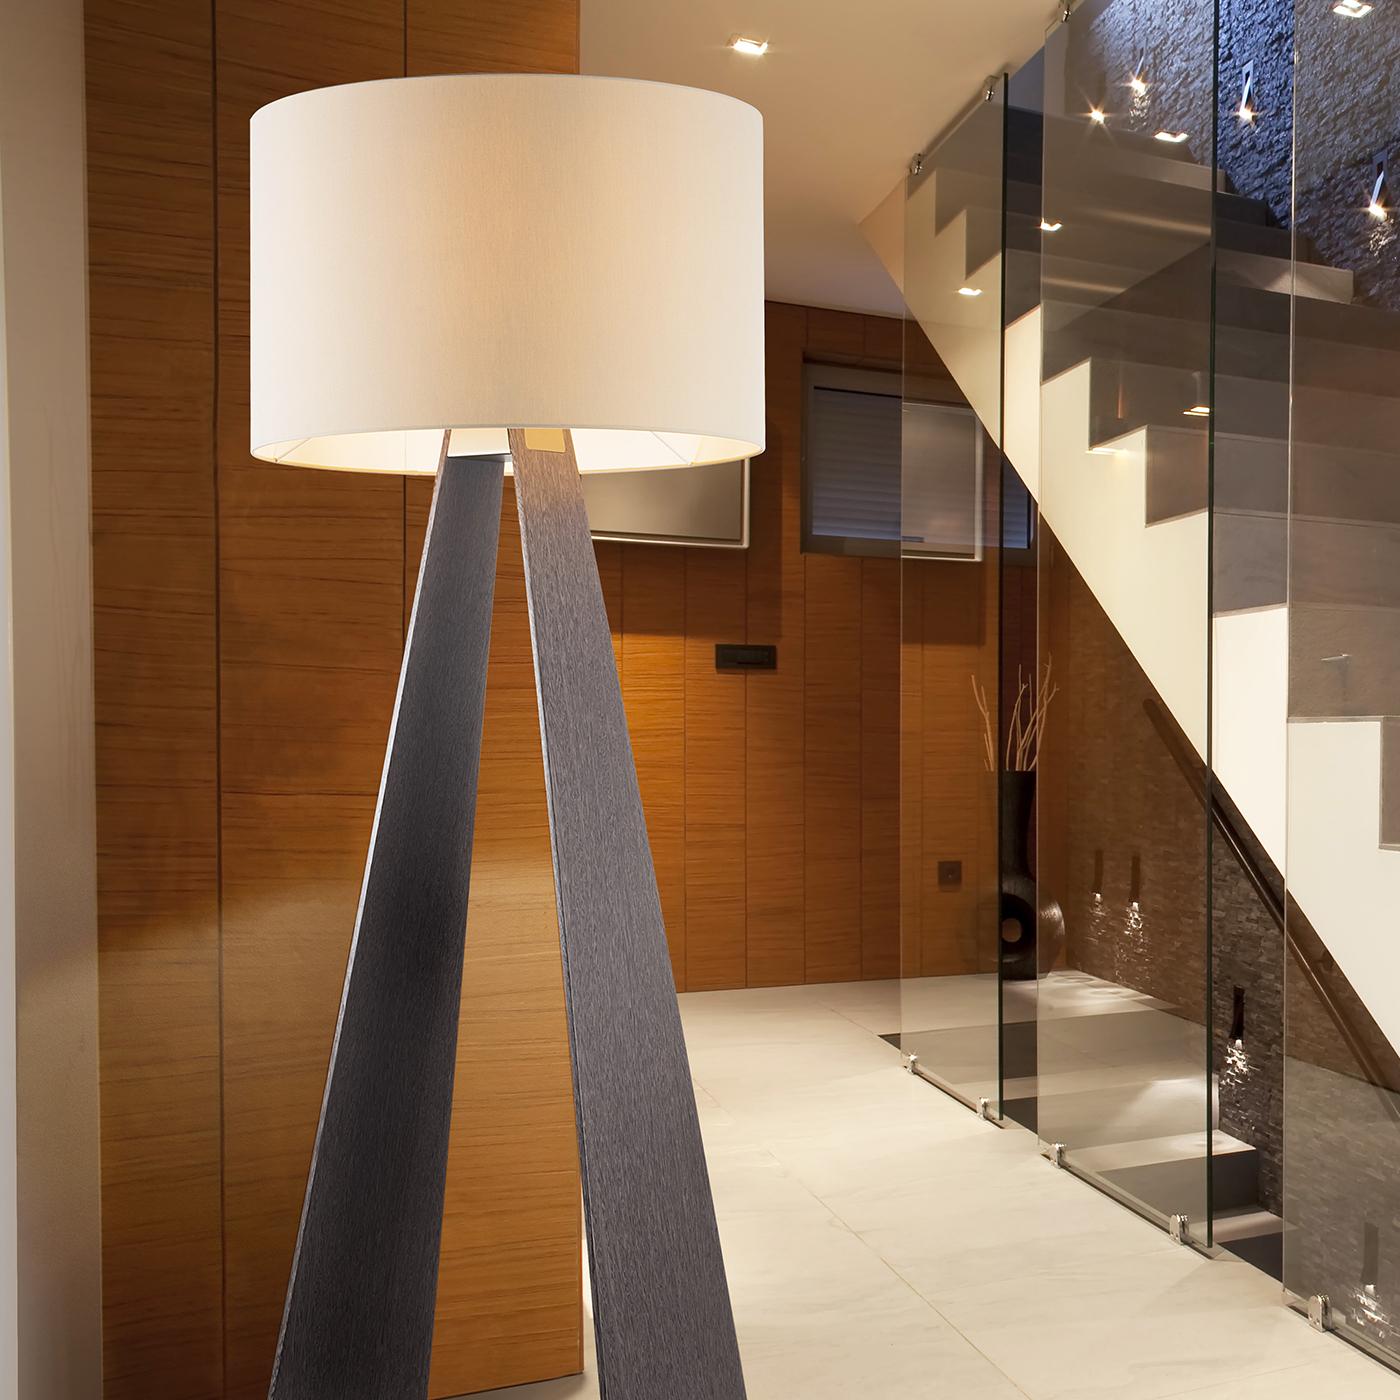 An astounding example of dynamic lighting design, this superbly stylish floor lamp is crafted in a choice of white lacquered oak, precomposed natural oak or precomposed natural teak, forming an A-frame as the main structure. Complimenting the clean